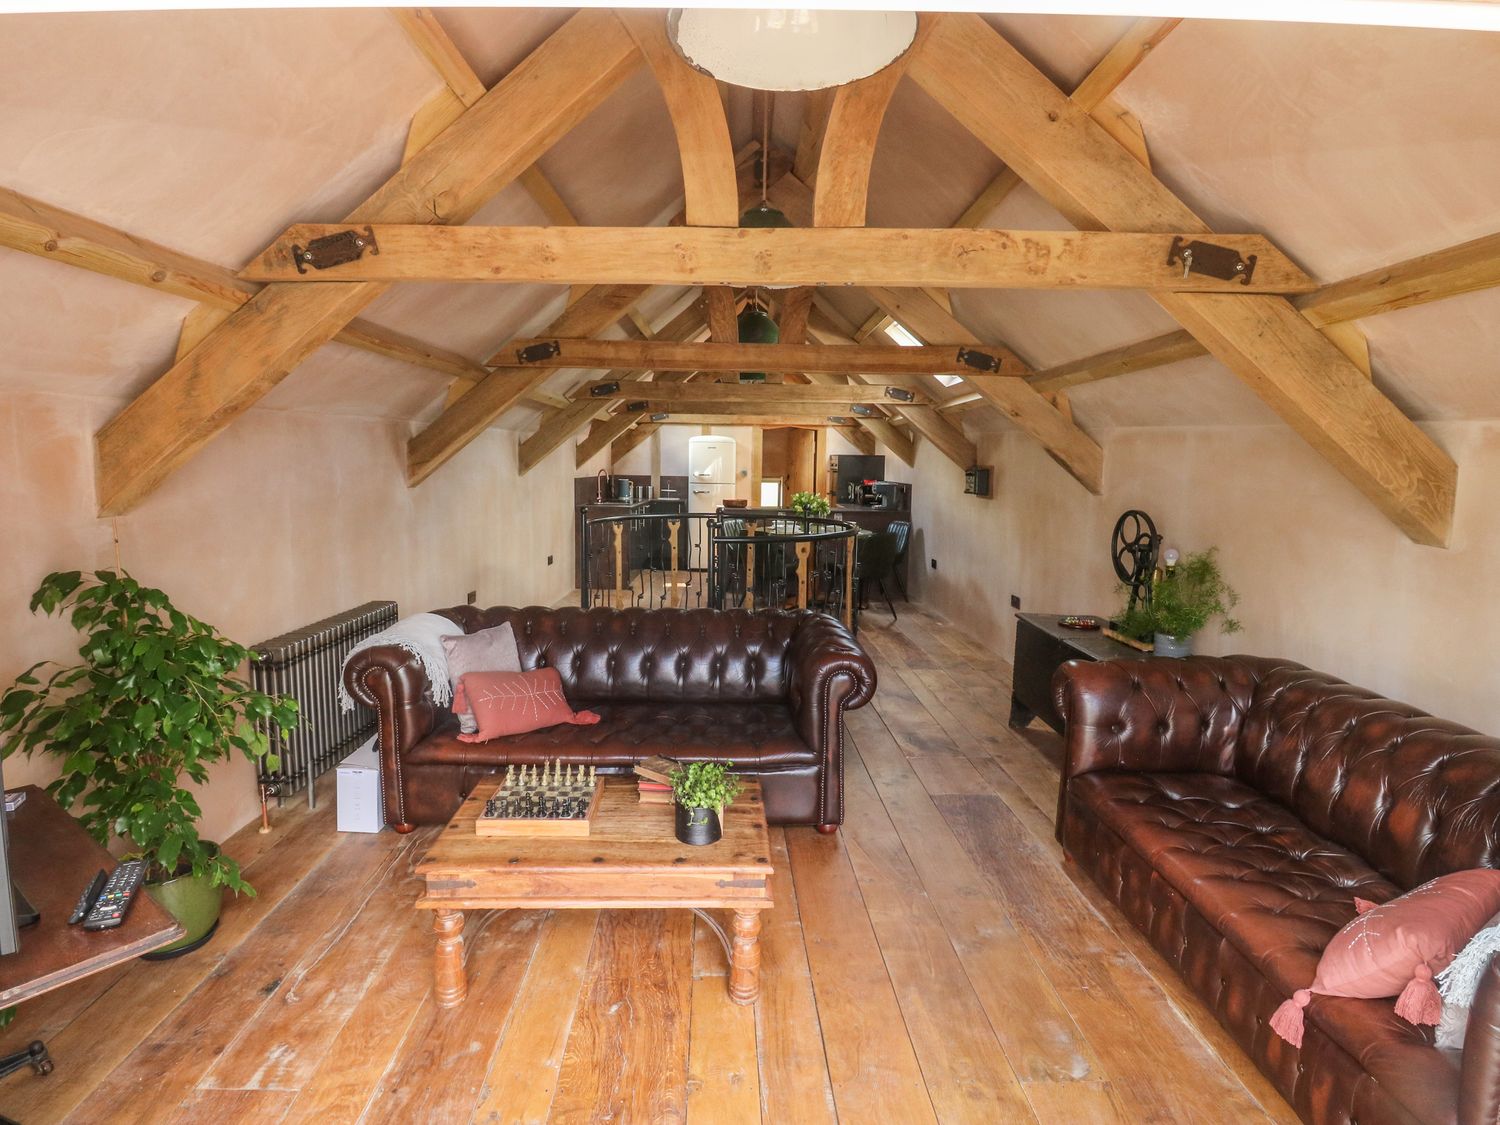 Becket's Barn in Northlew in Devon. Two-bed barn conversion with original features & private balcony